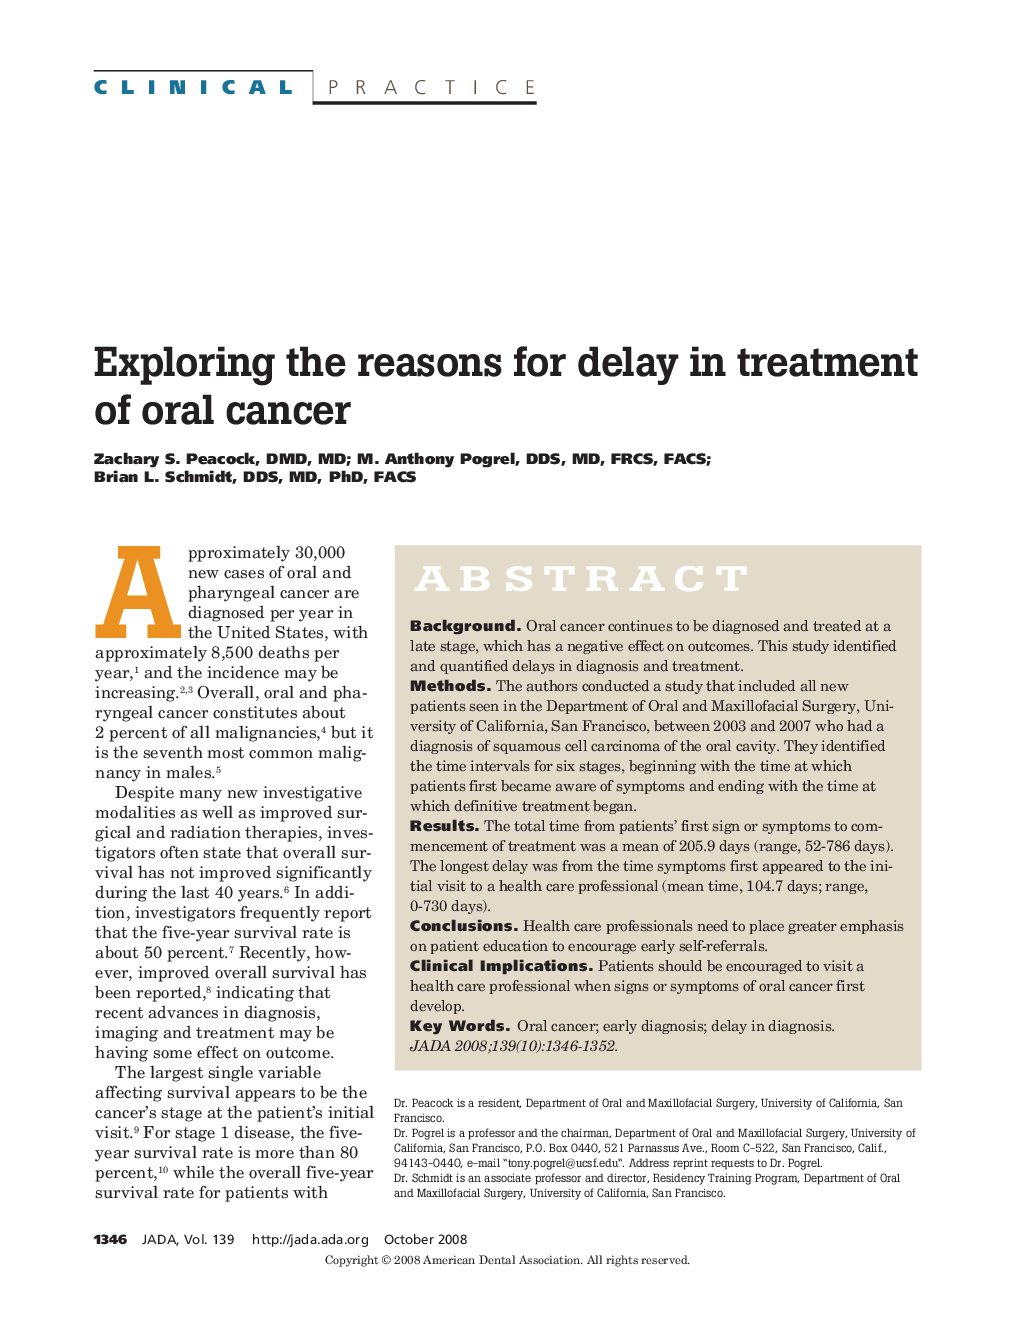 Exploring the Reasons for Delay in Treatment of Oral Cancer 